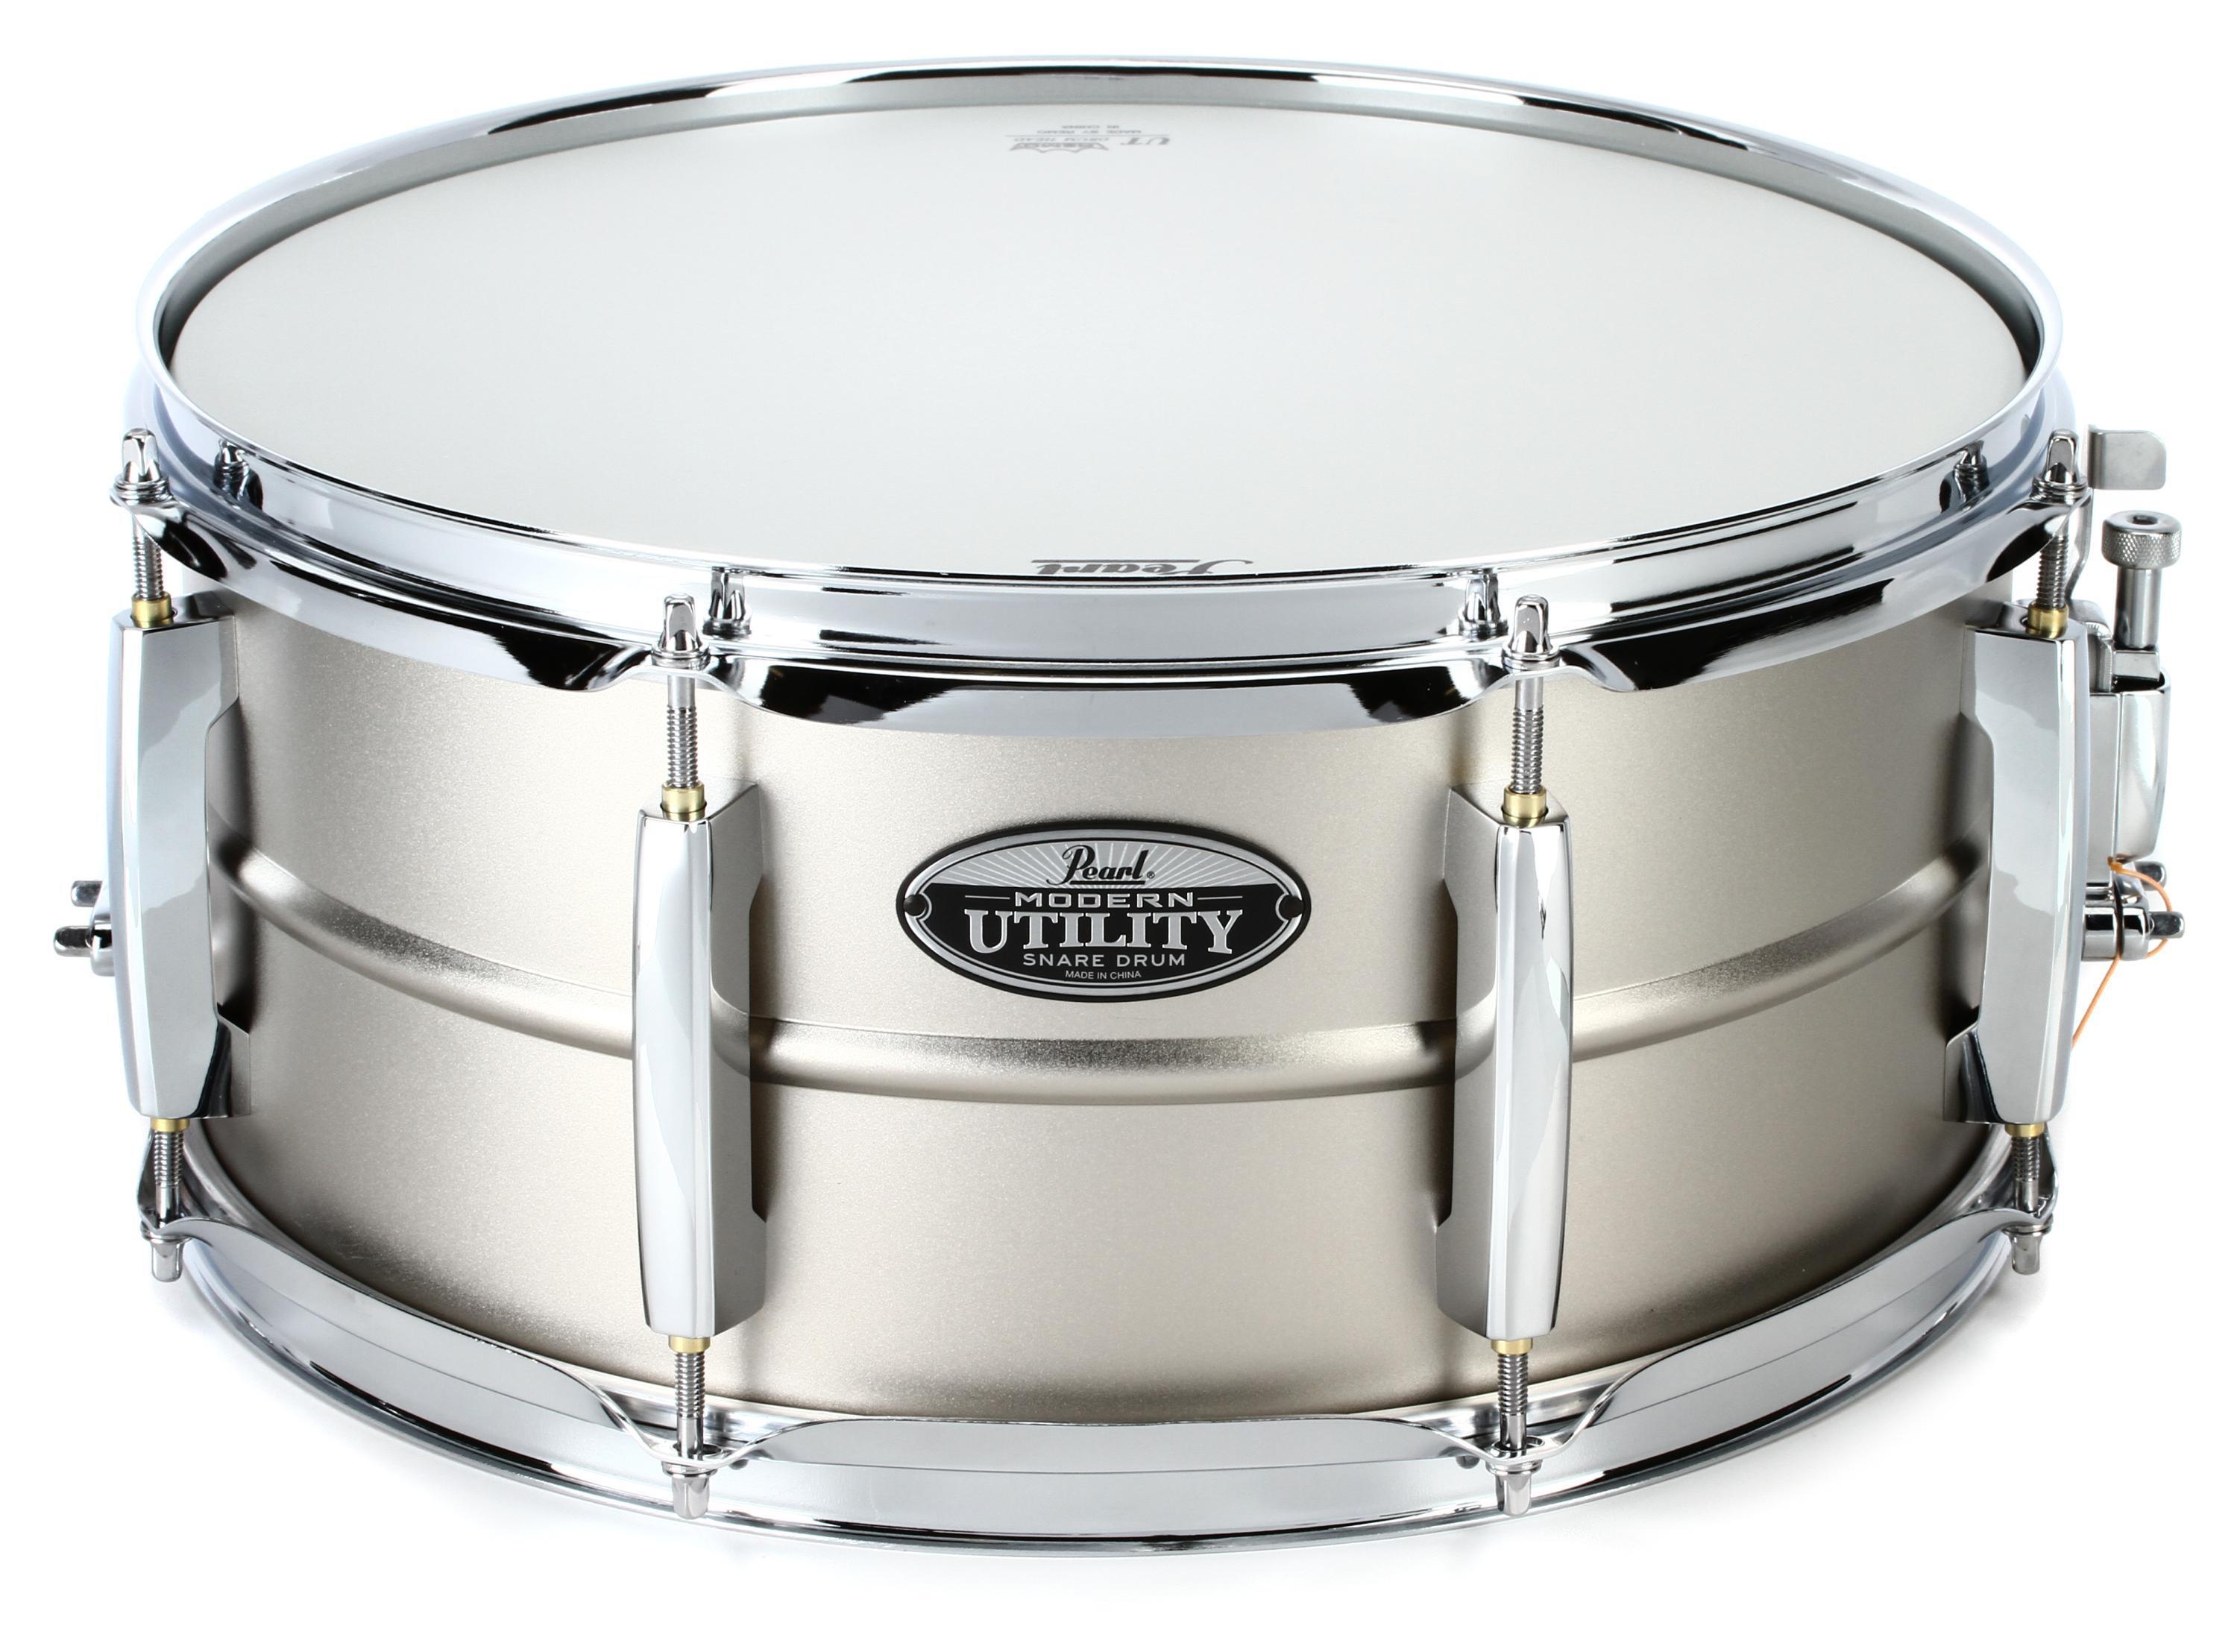 Pearl Modern Utility Steel Snare Drum - 14 x 6.5 inch | Sweetwater